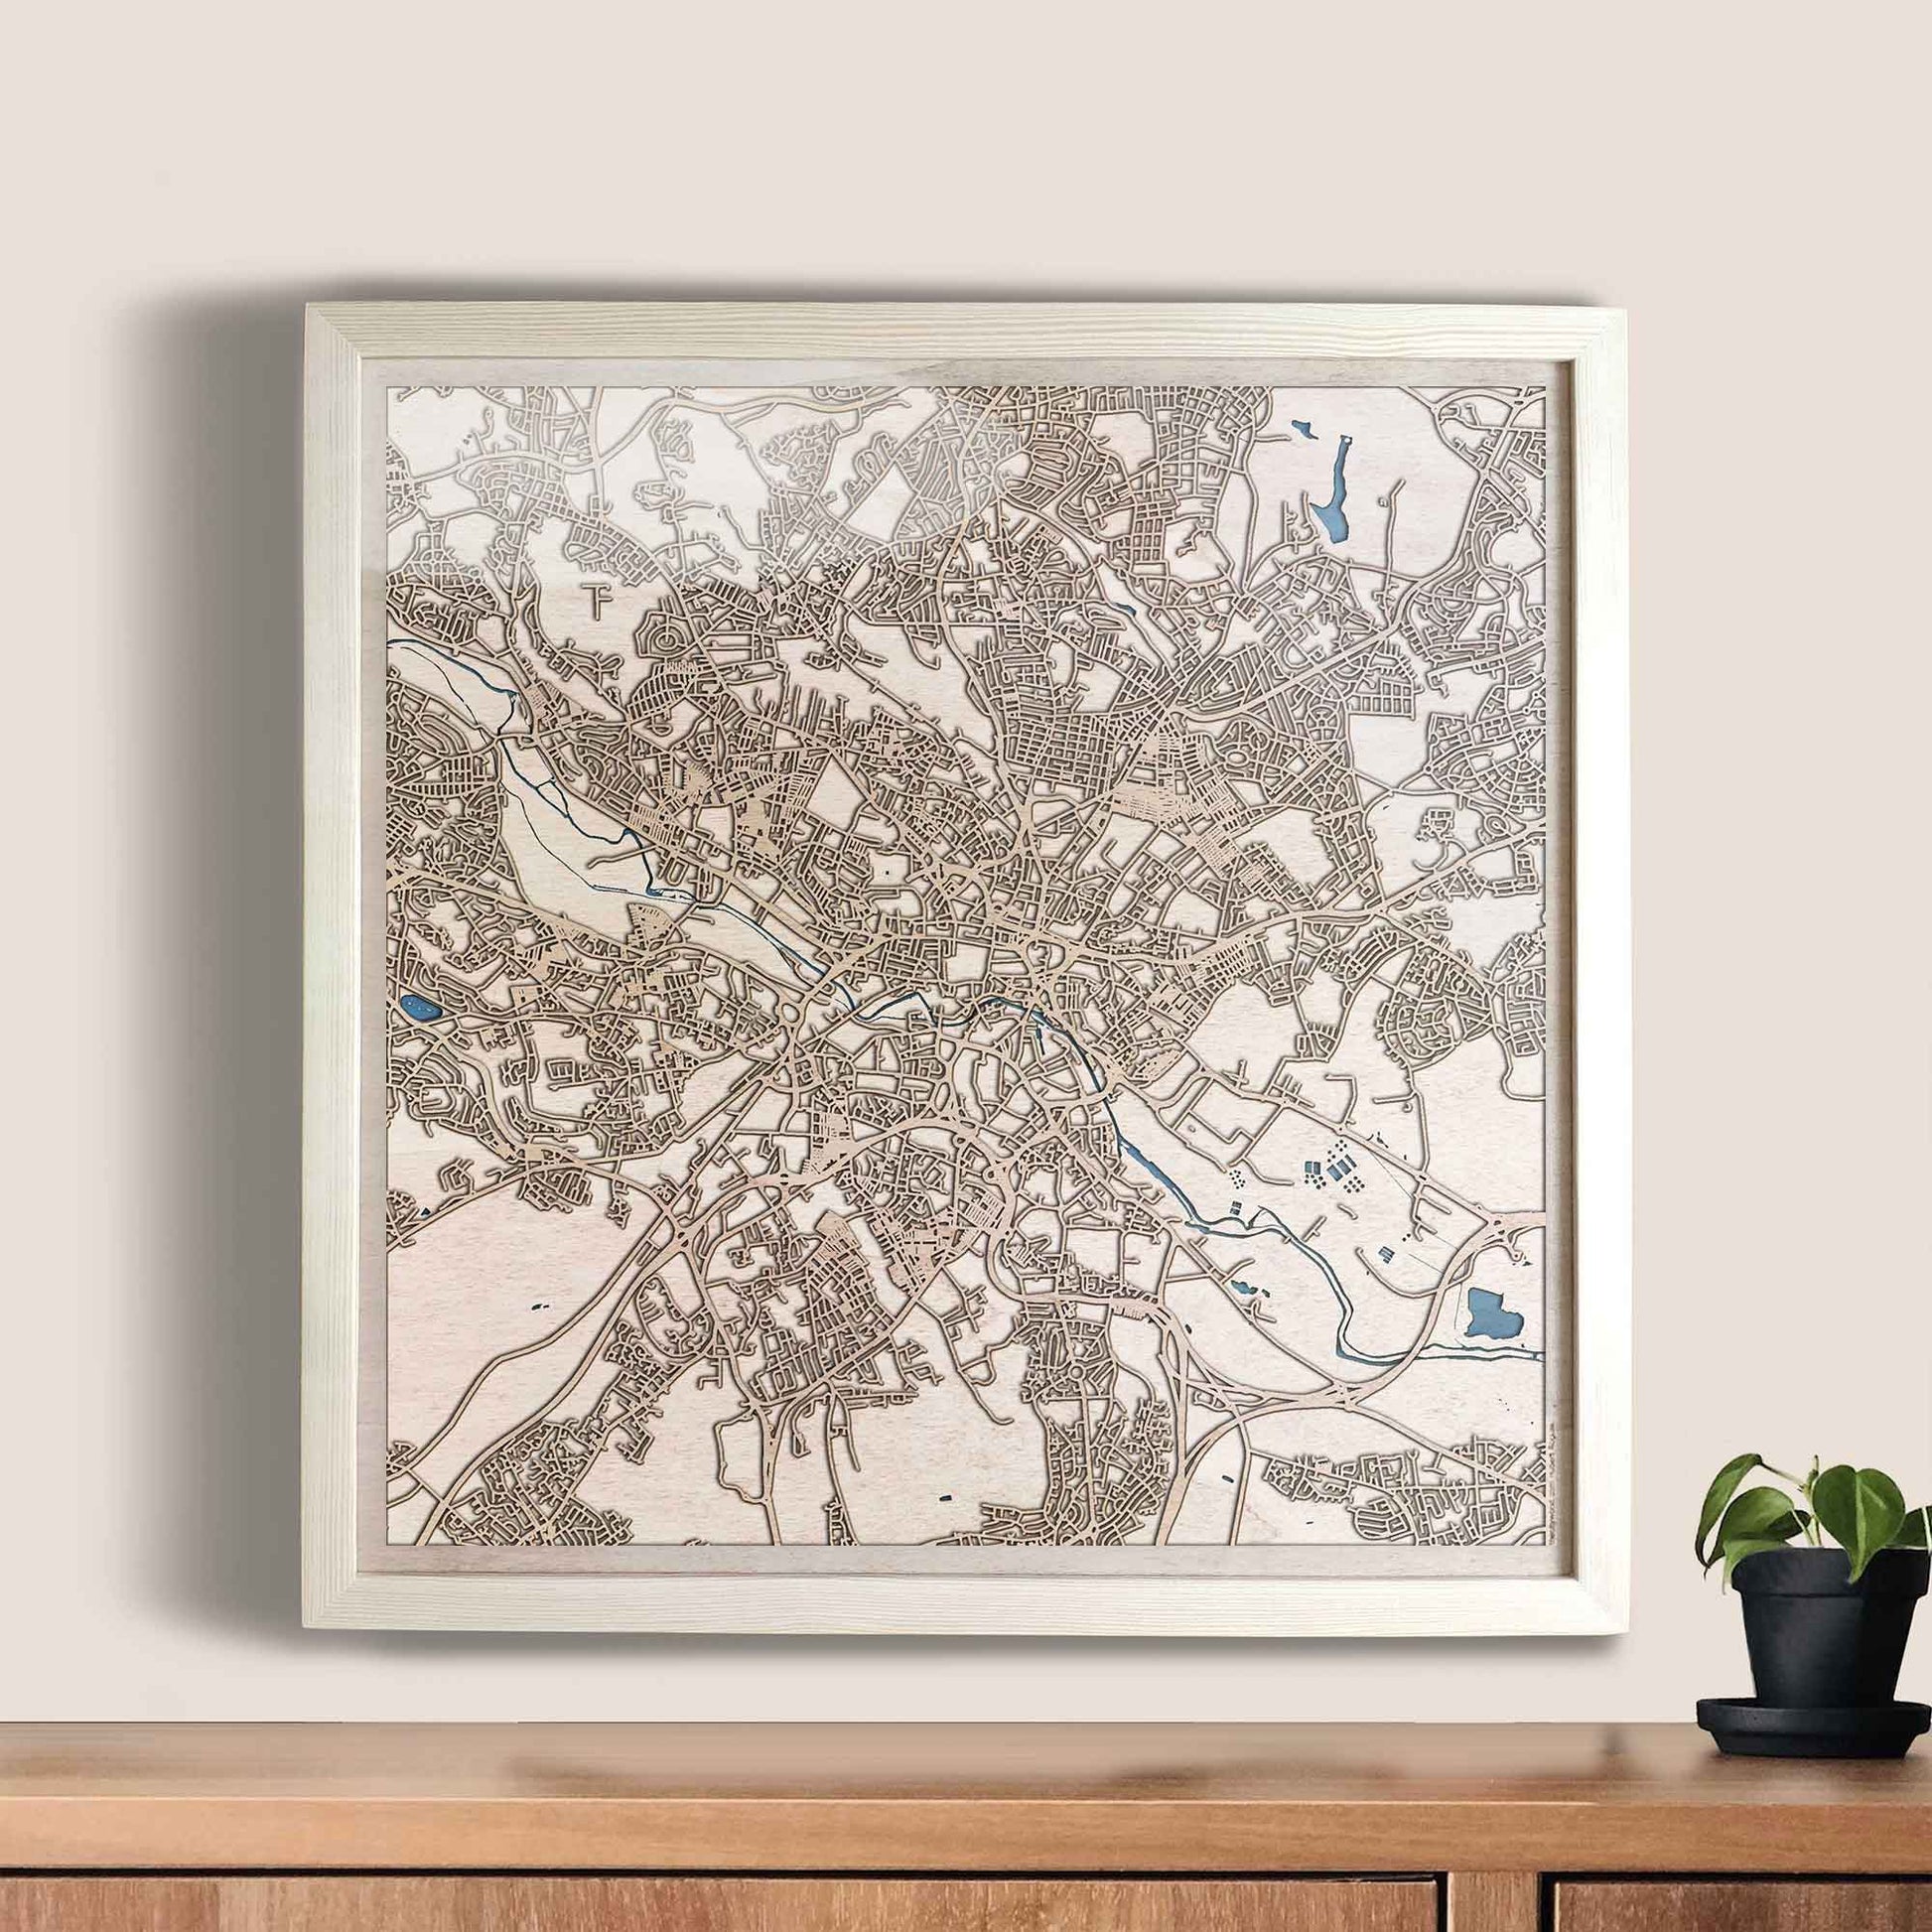 Leeds Wooden Map by CityWood - Custom Wood Map Art - Unique Laser Cut Engraved - Anniversary Gift